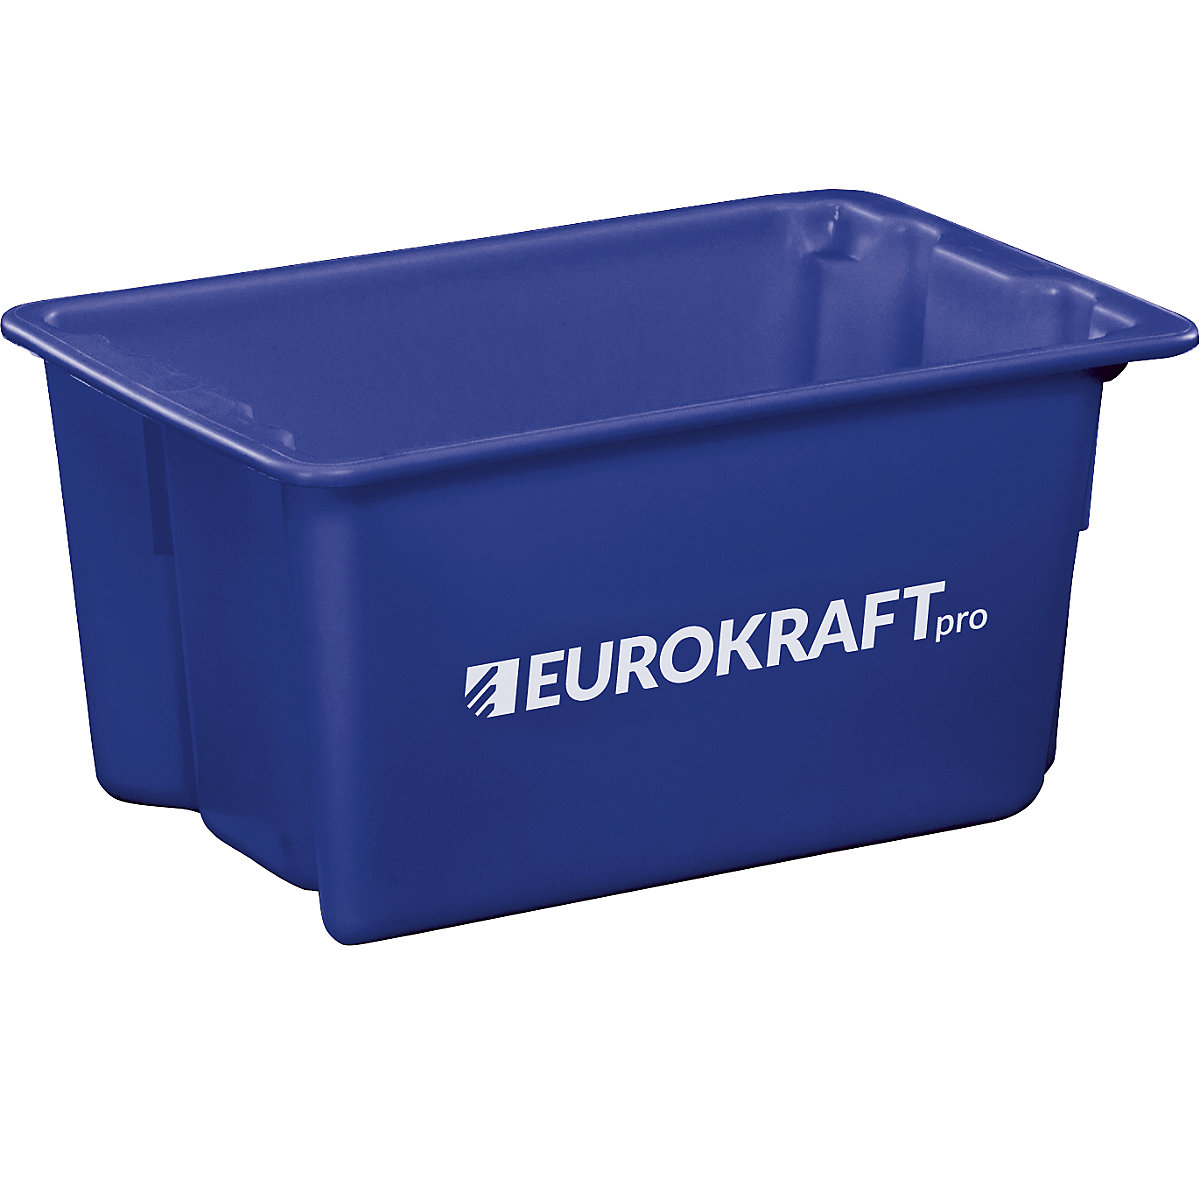 EUROKRAFTpro – Stack/nest container made of polypropylene suitable for foodstuffs, 50 l capacity, pack of 3, solid walls and base, blue